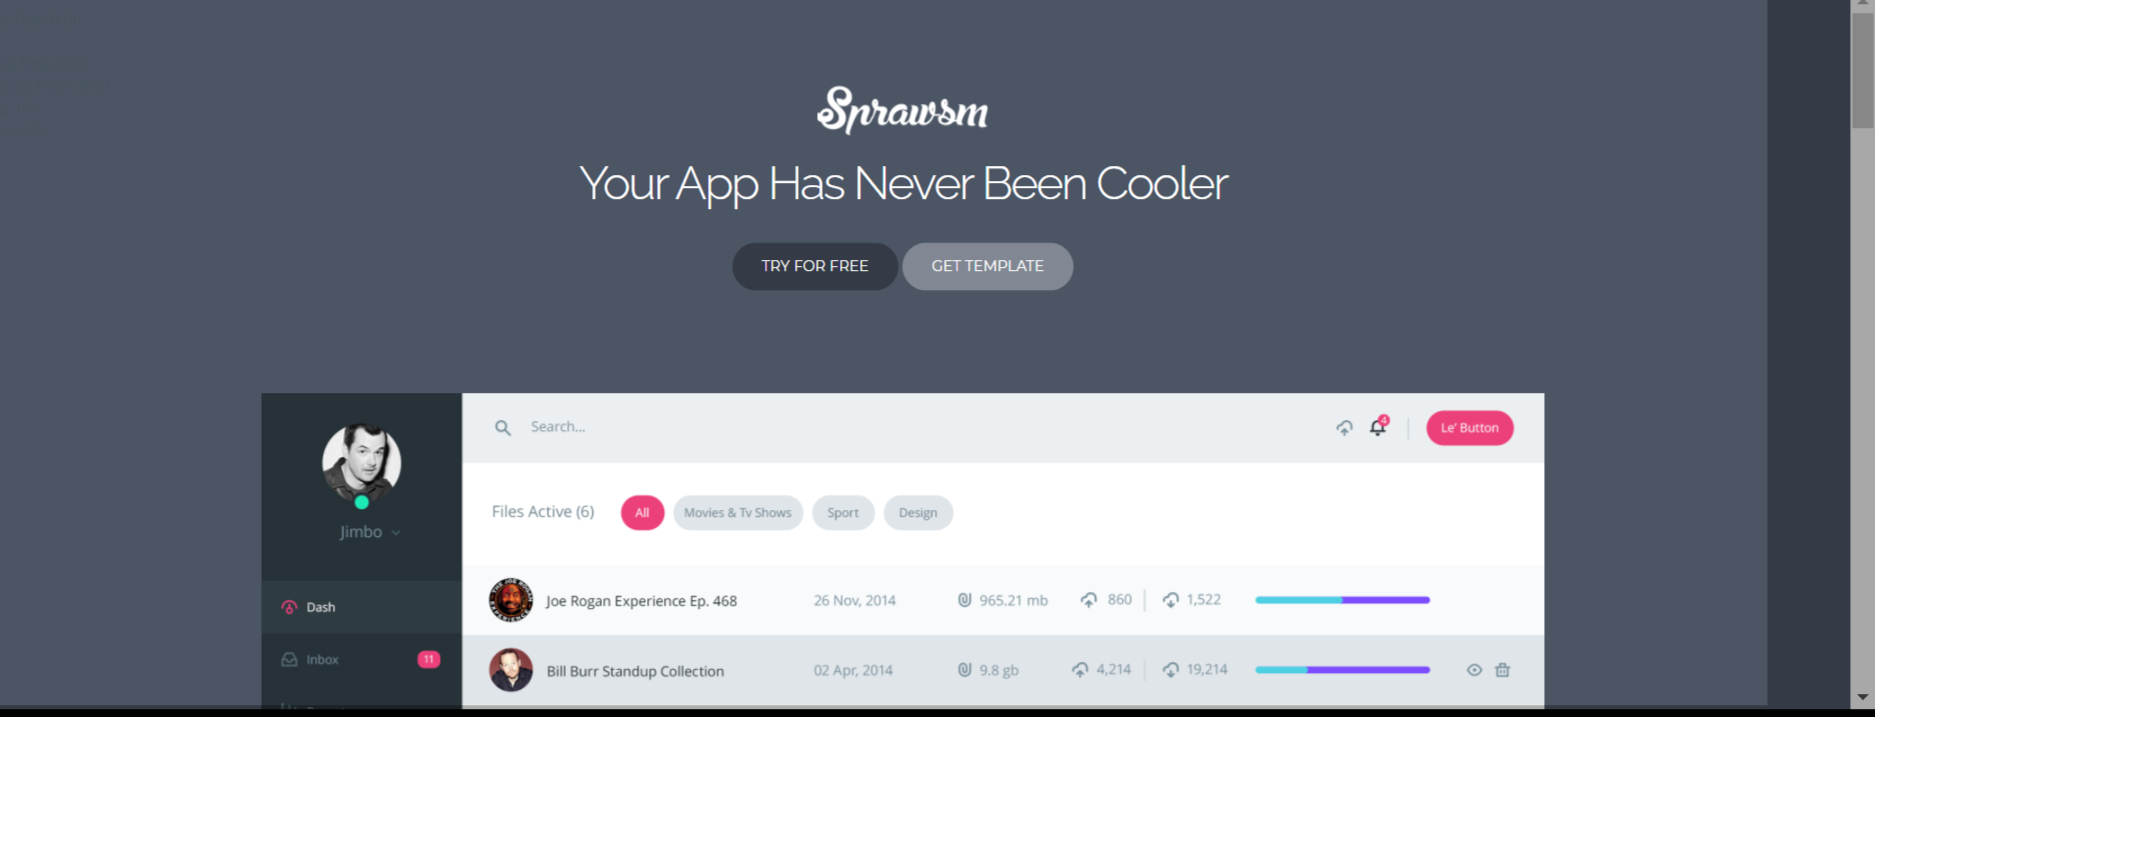 Superawesome-Retina-Bootstrap-3-App-Landing-Page-Preview-ThemeForest.png